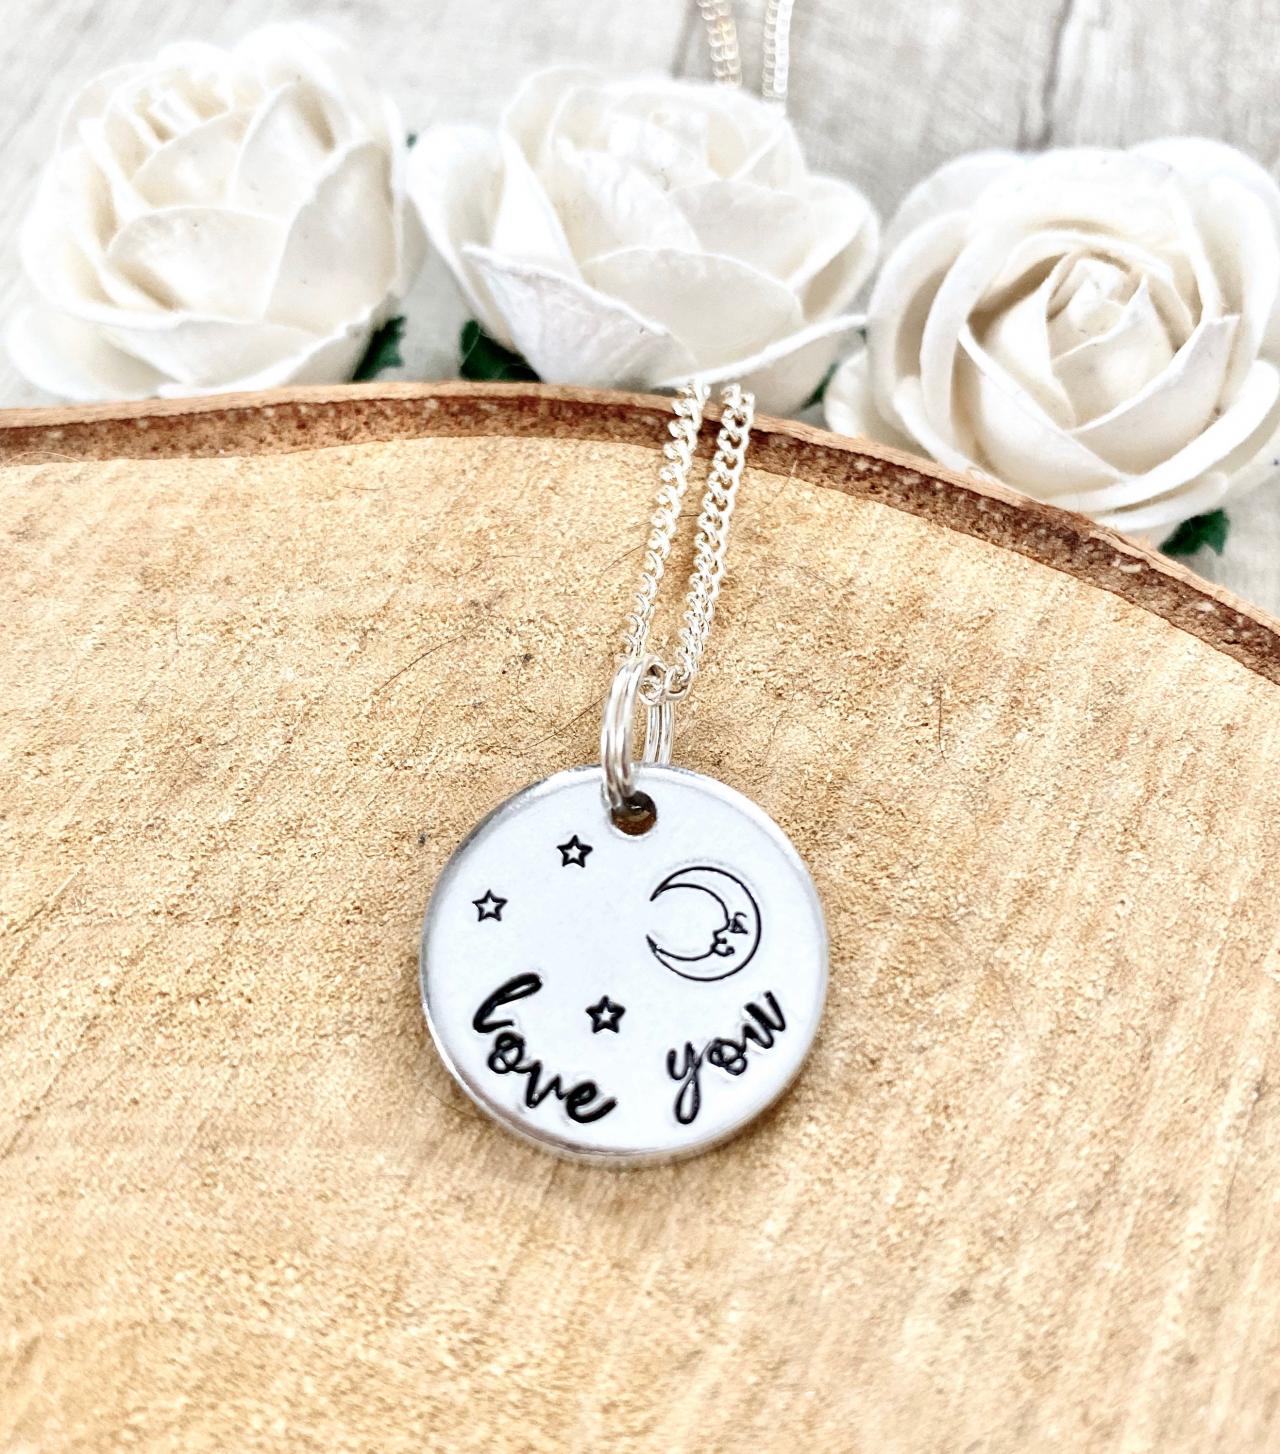 I Love You, To The Moon, Mom Gift, Mumgift, From The Kids, Grandma Gift, Mothers Day Gift, Birthday Gift, For Her, Valentines Day Gift